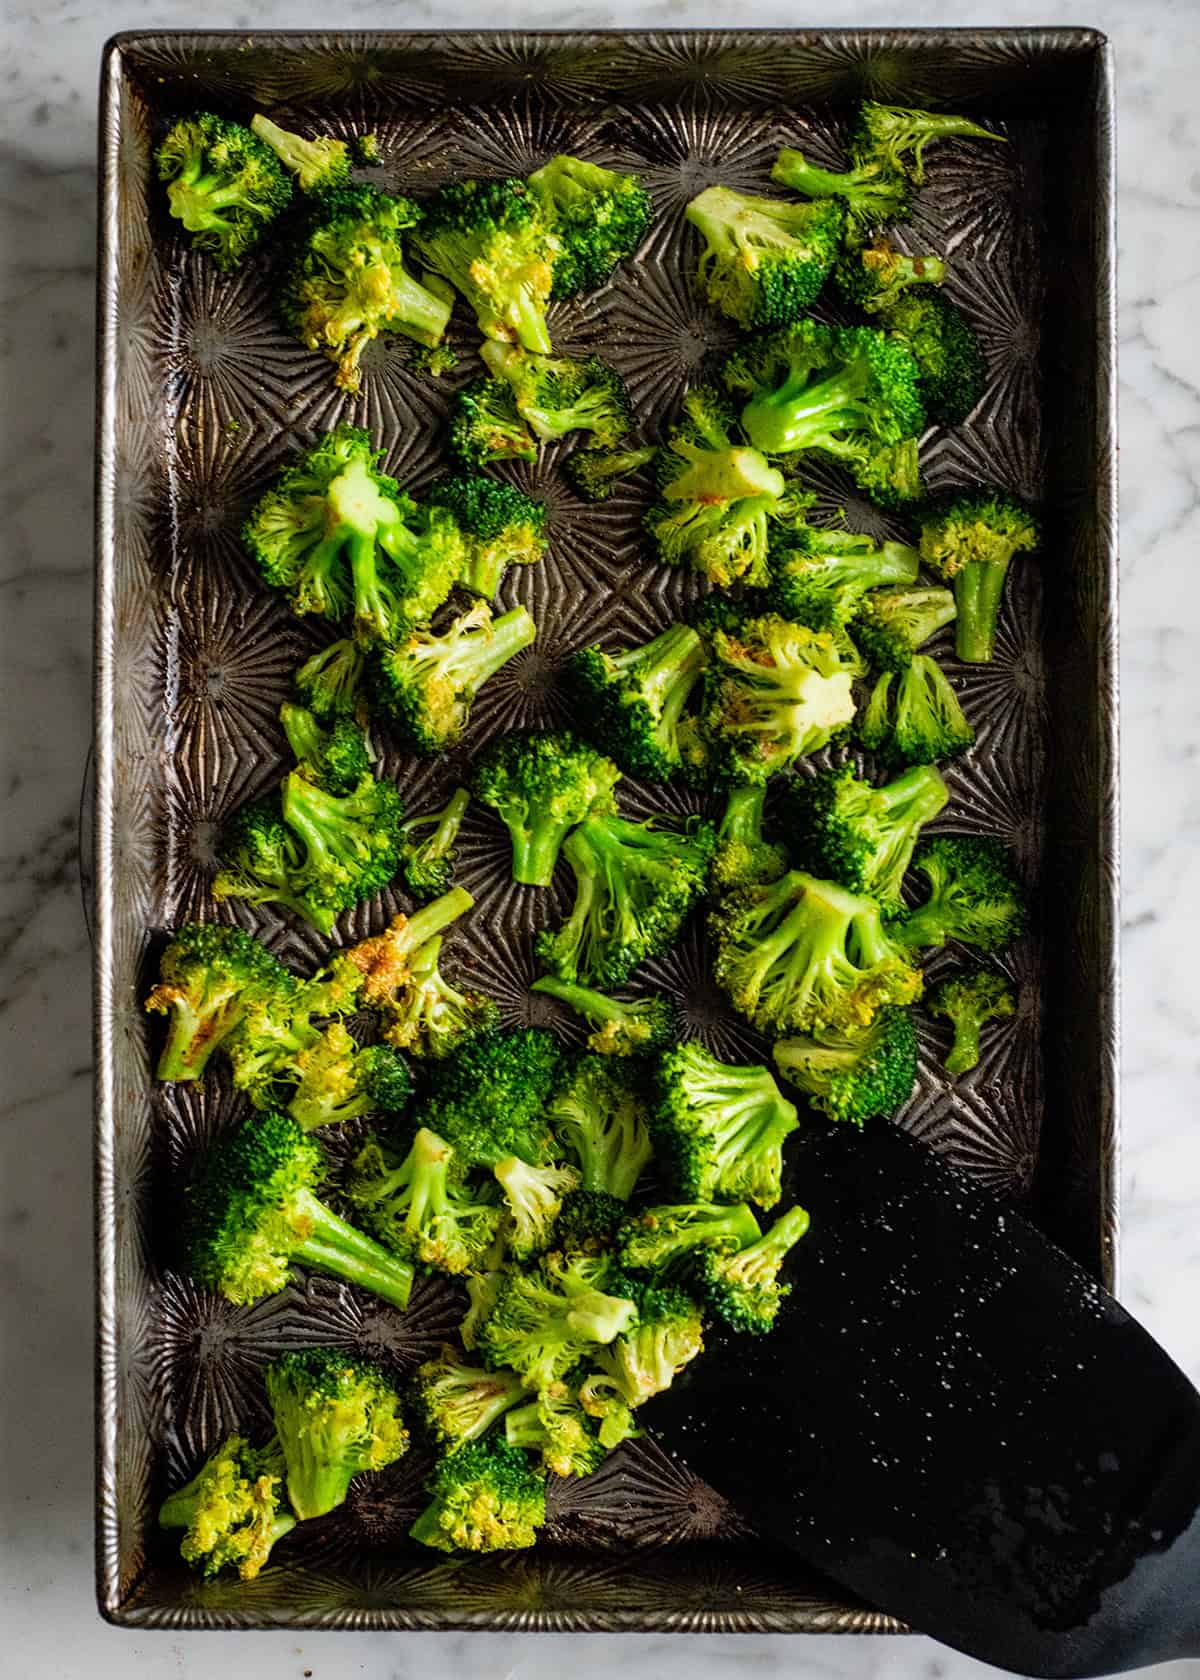 how to roast broccoli in the oven - broccoli on a baking sheet after roasting while stirring